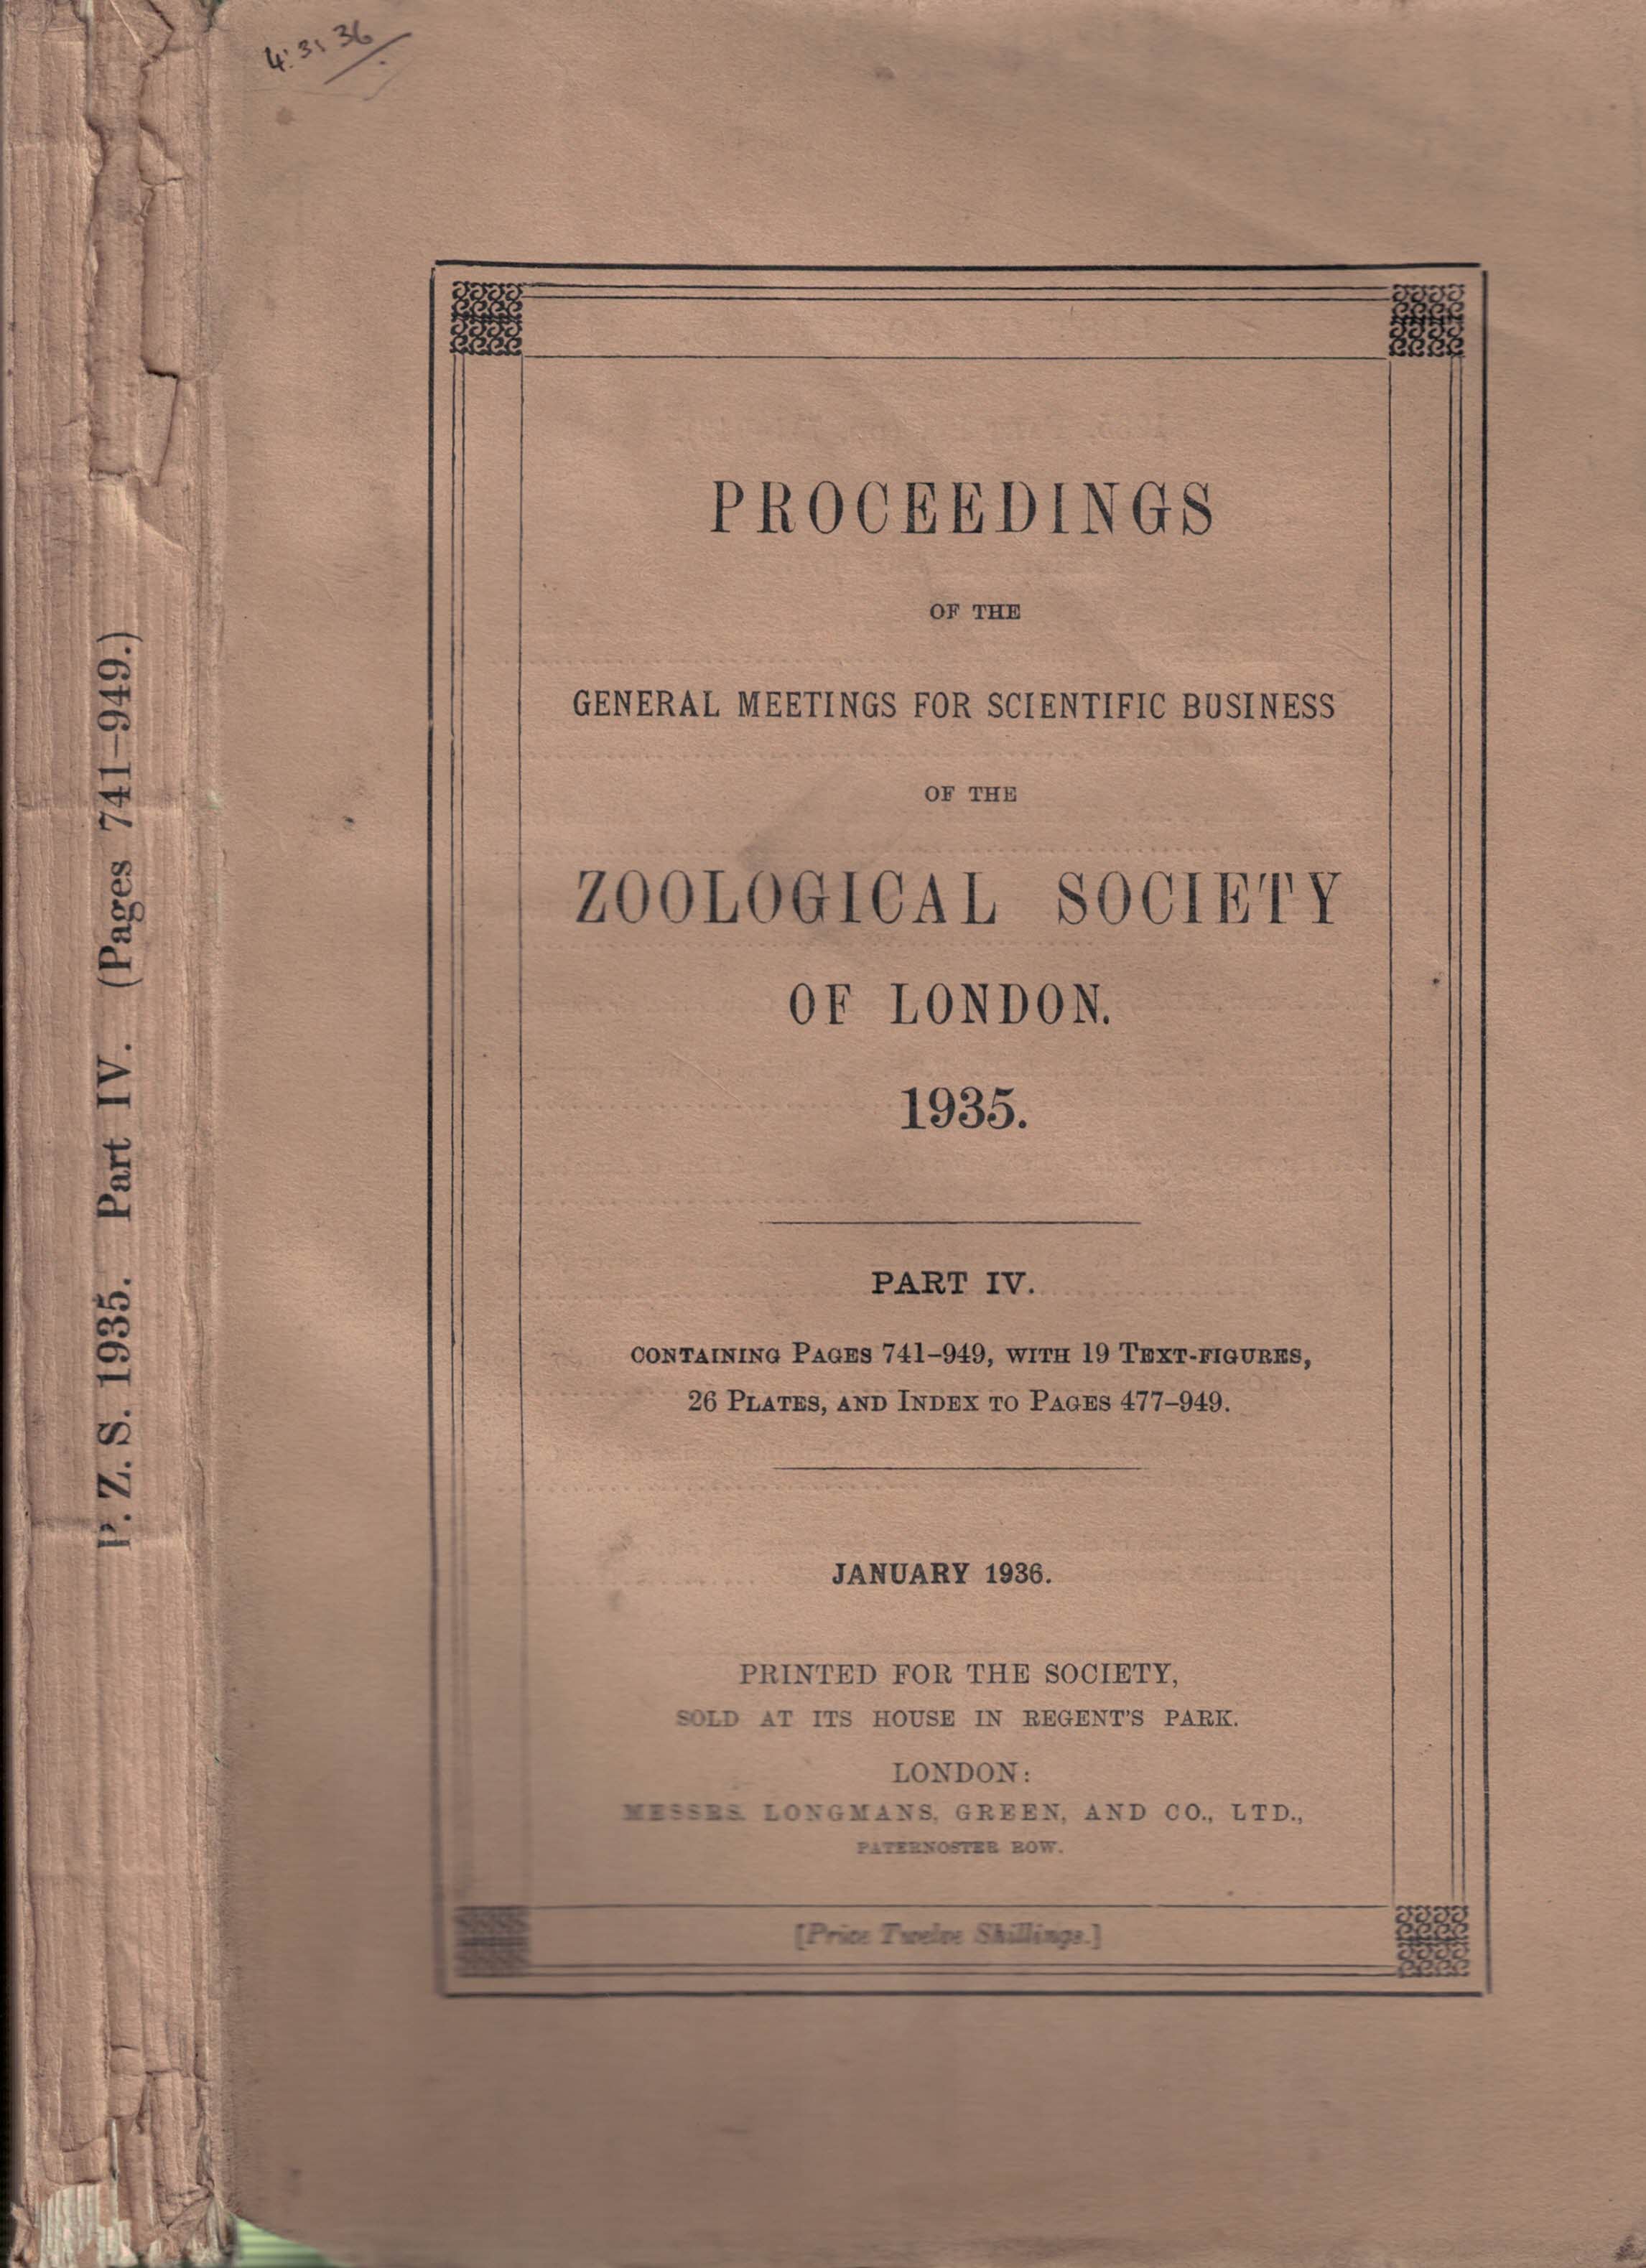 Proceedings of the General Meetings for Scientific Business of the Zoological Society of London. Part IV. January 1936.